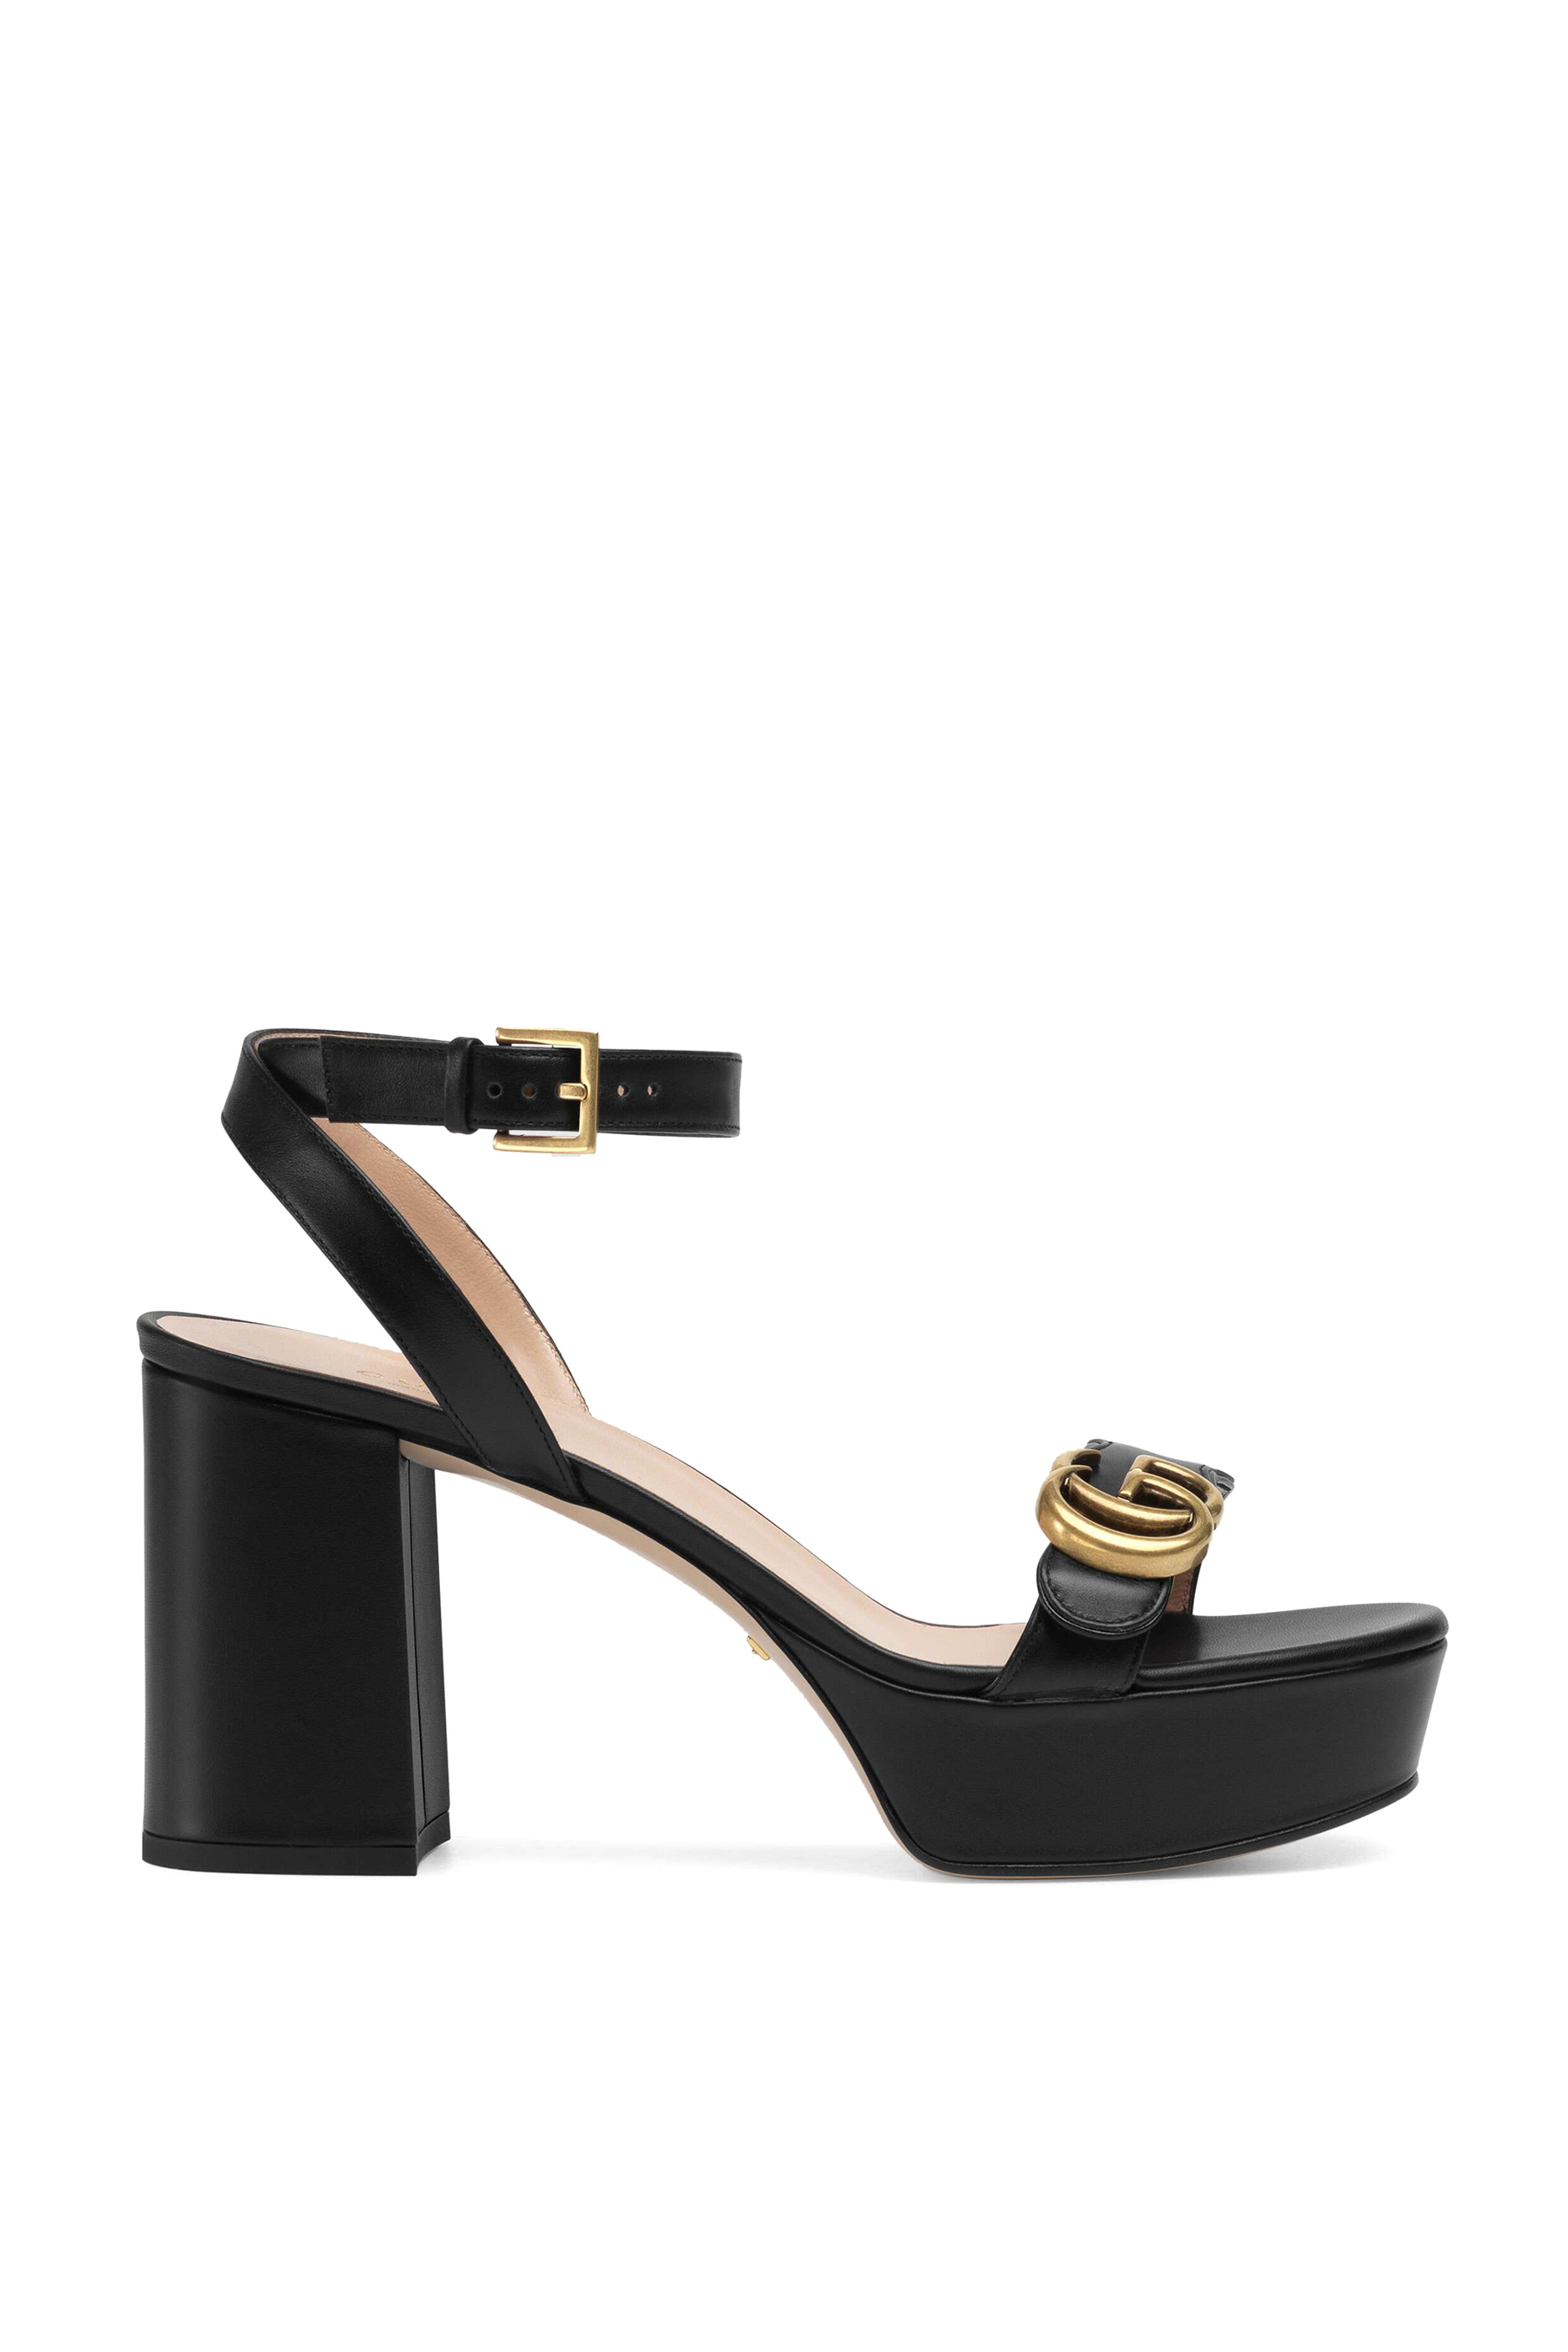 Buy Gucci Platform Sandals With Double G for Womens | Bloomingdale's Kuwait